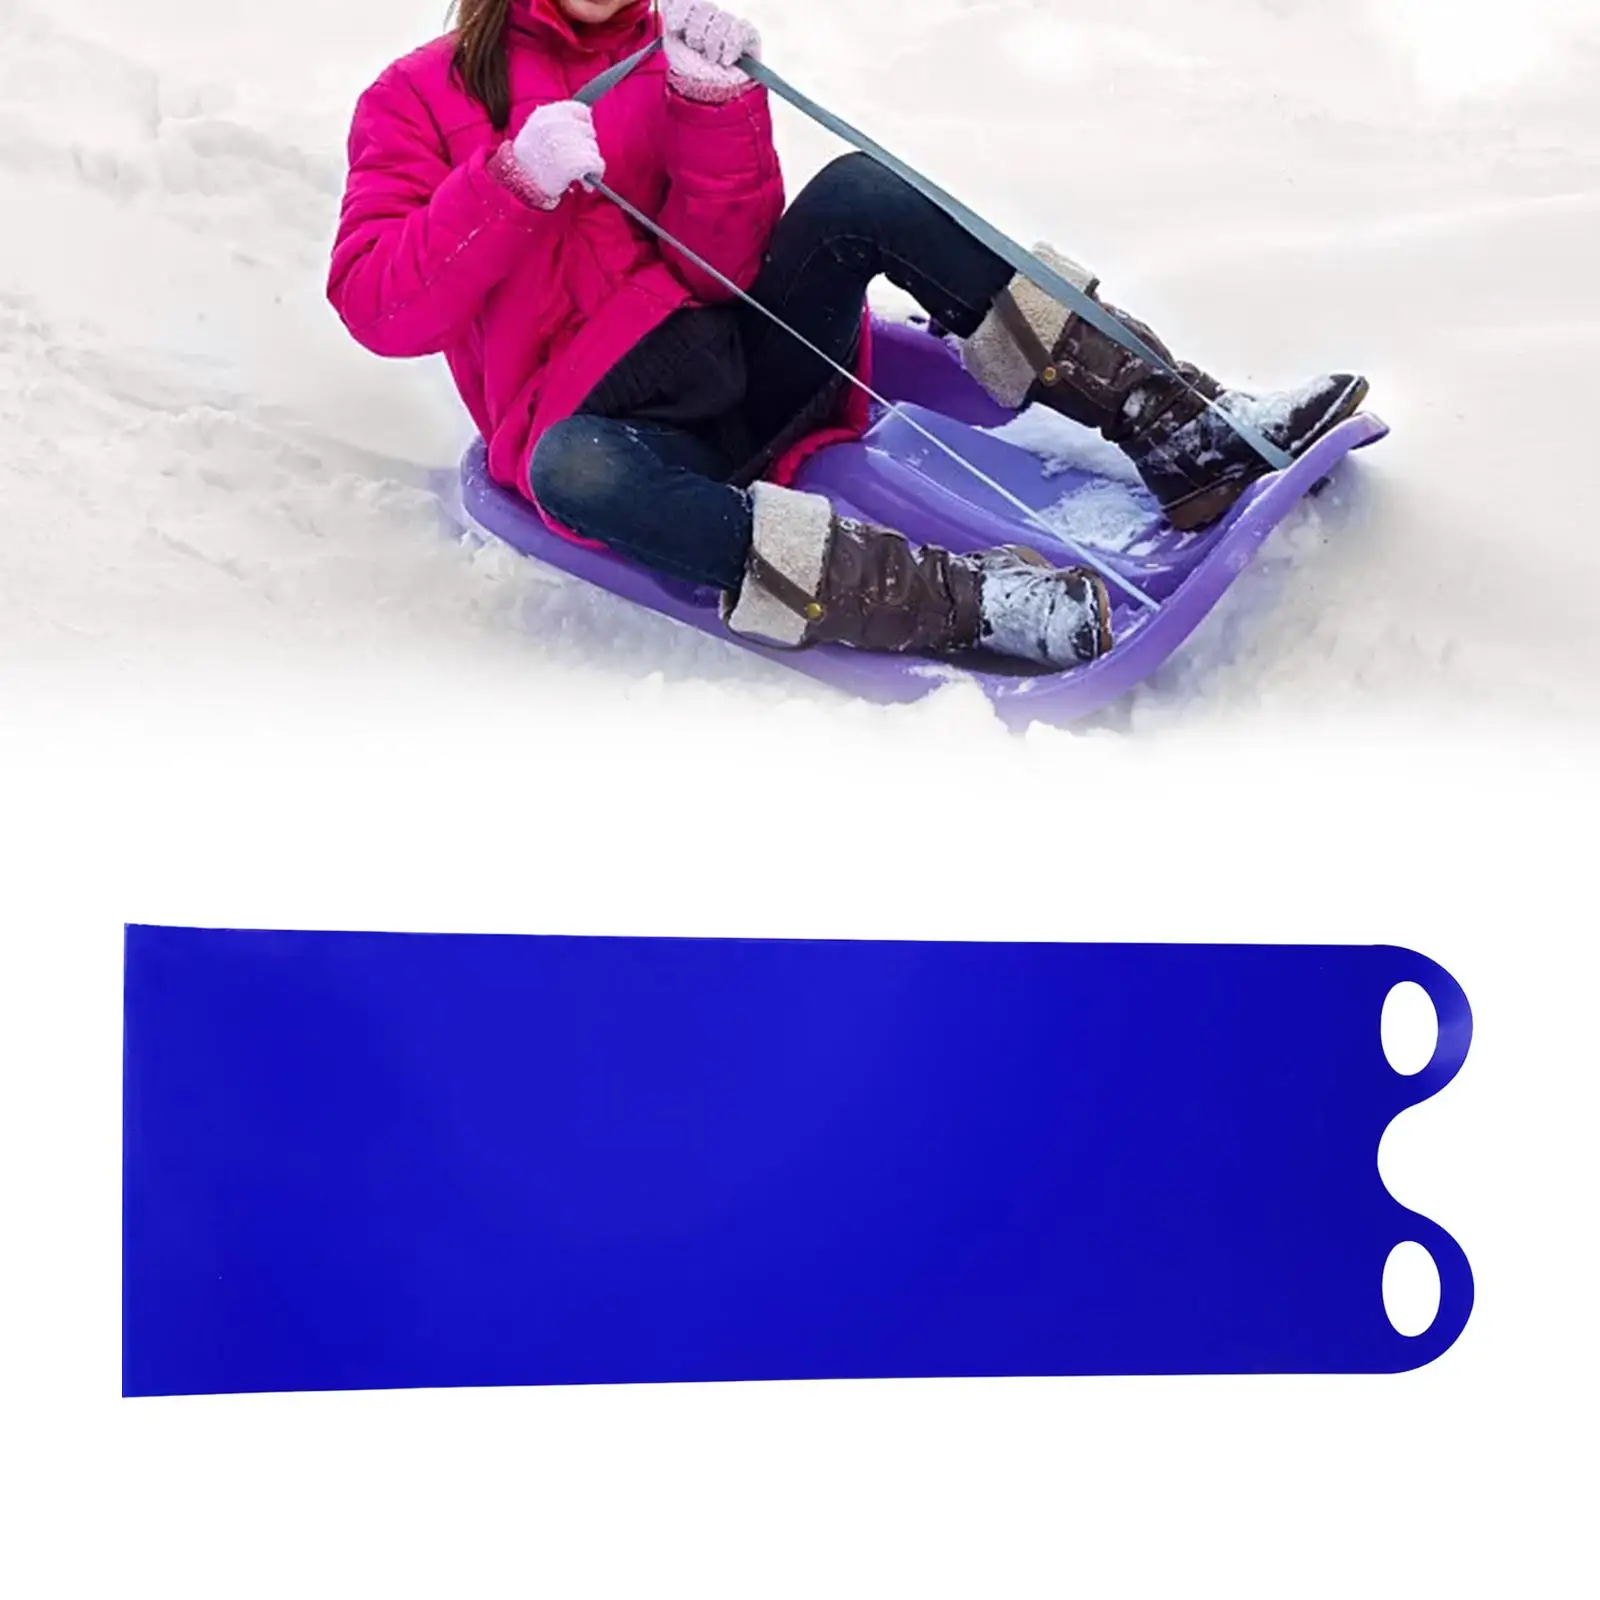 Snow Slide Mat Roll up Sled Mat Wear Resistant for Adults Sledge Flying Carpet Snow Sled for Snowboarding Ski Outdoor Fun